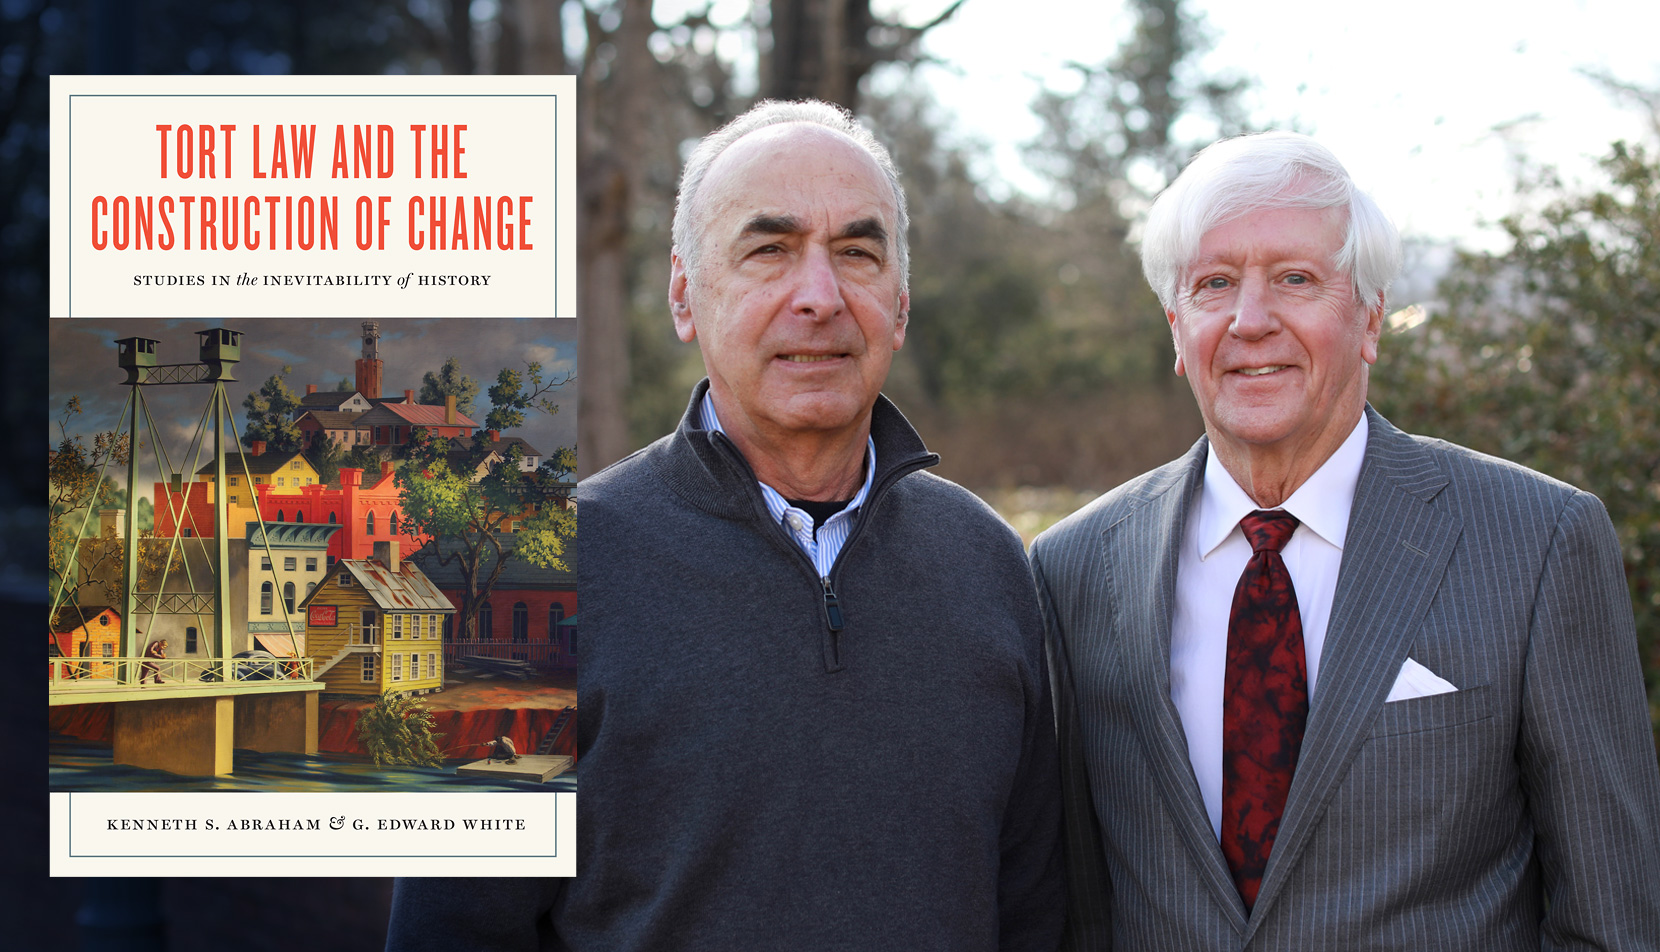 “Tort Law and the Construction of Change: Studies in the Inevitability of History” and Kenneth Abraham and G. Edward White